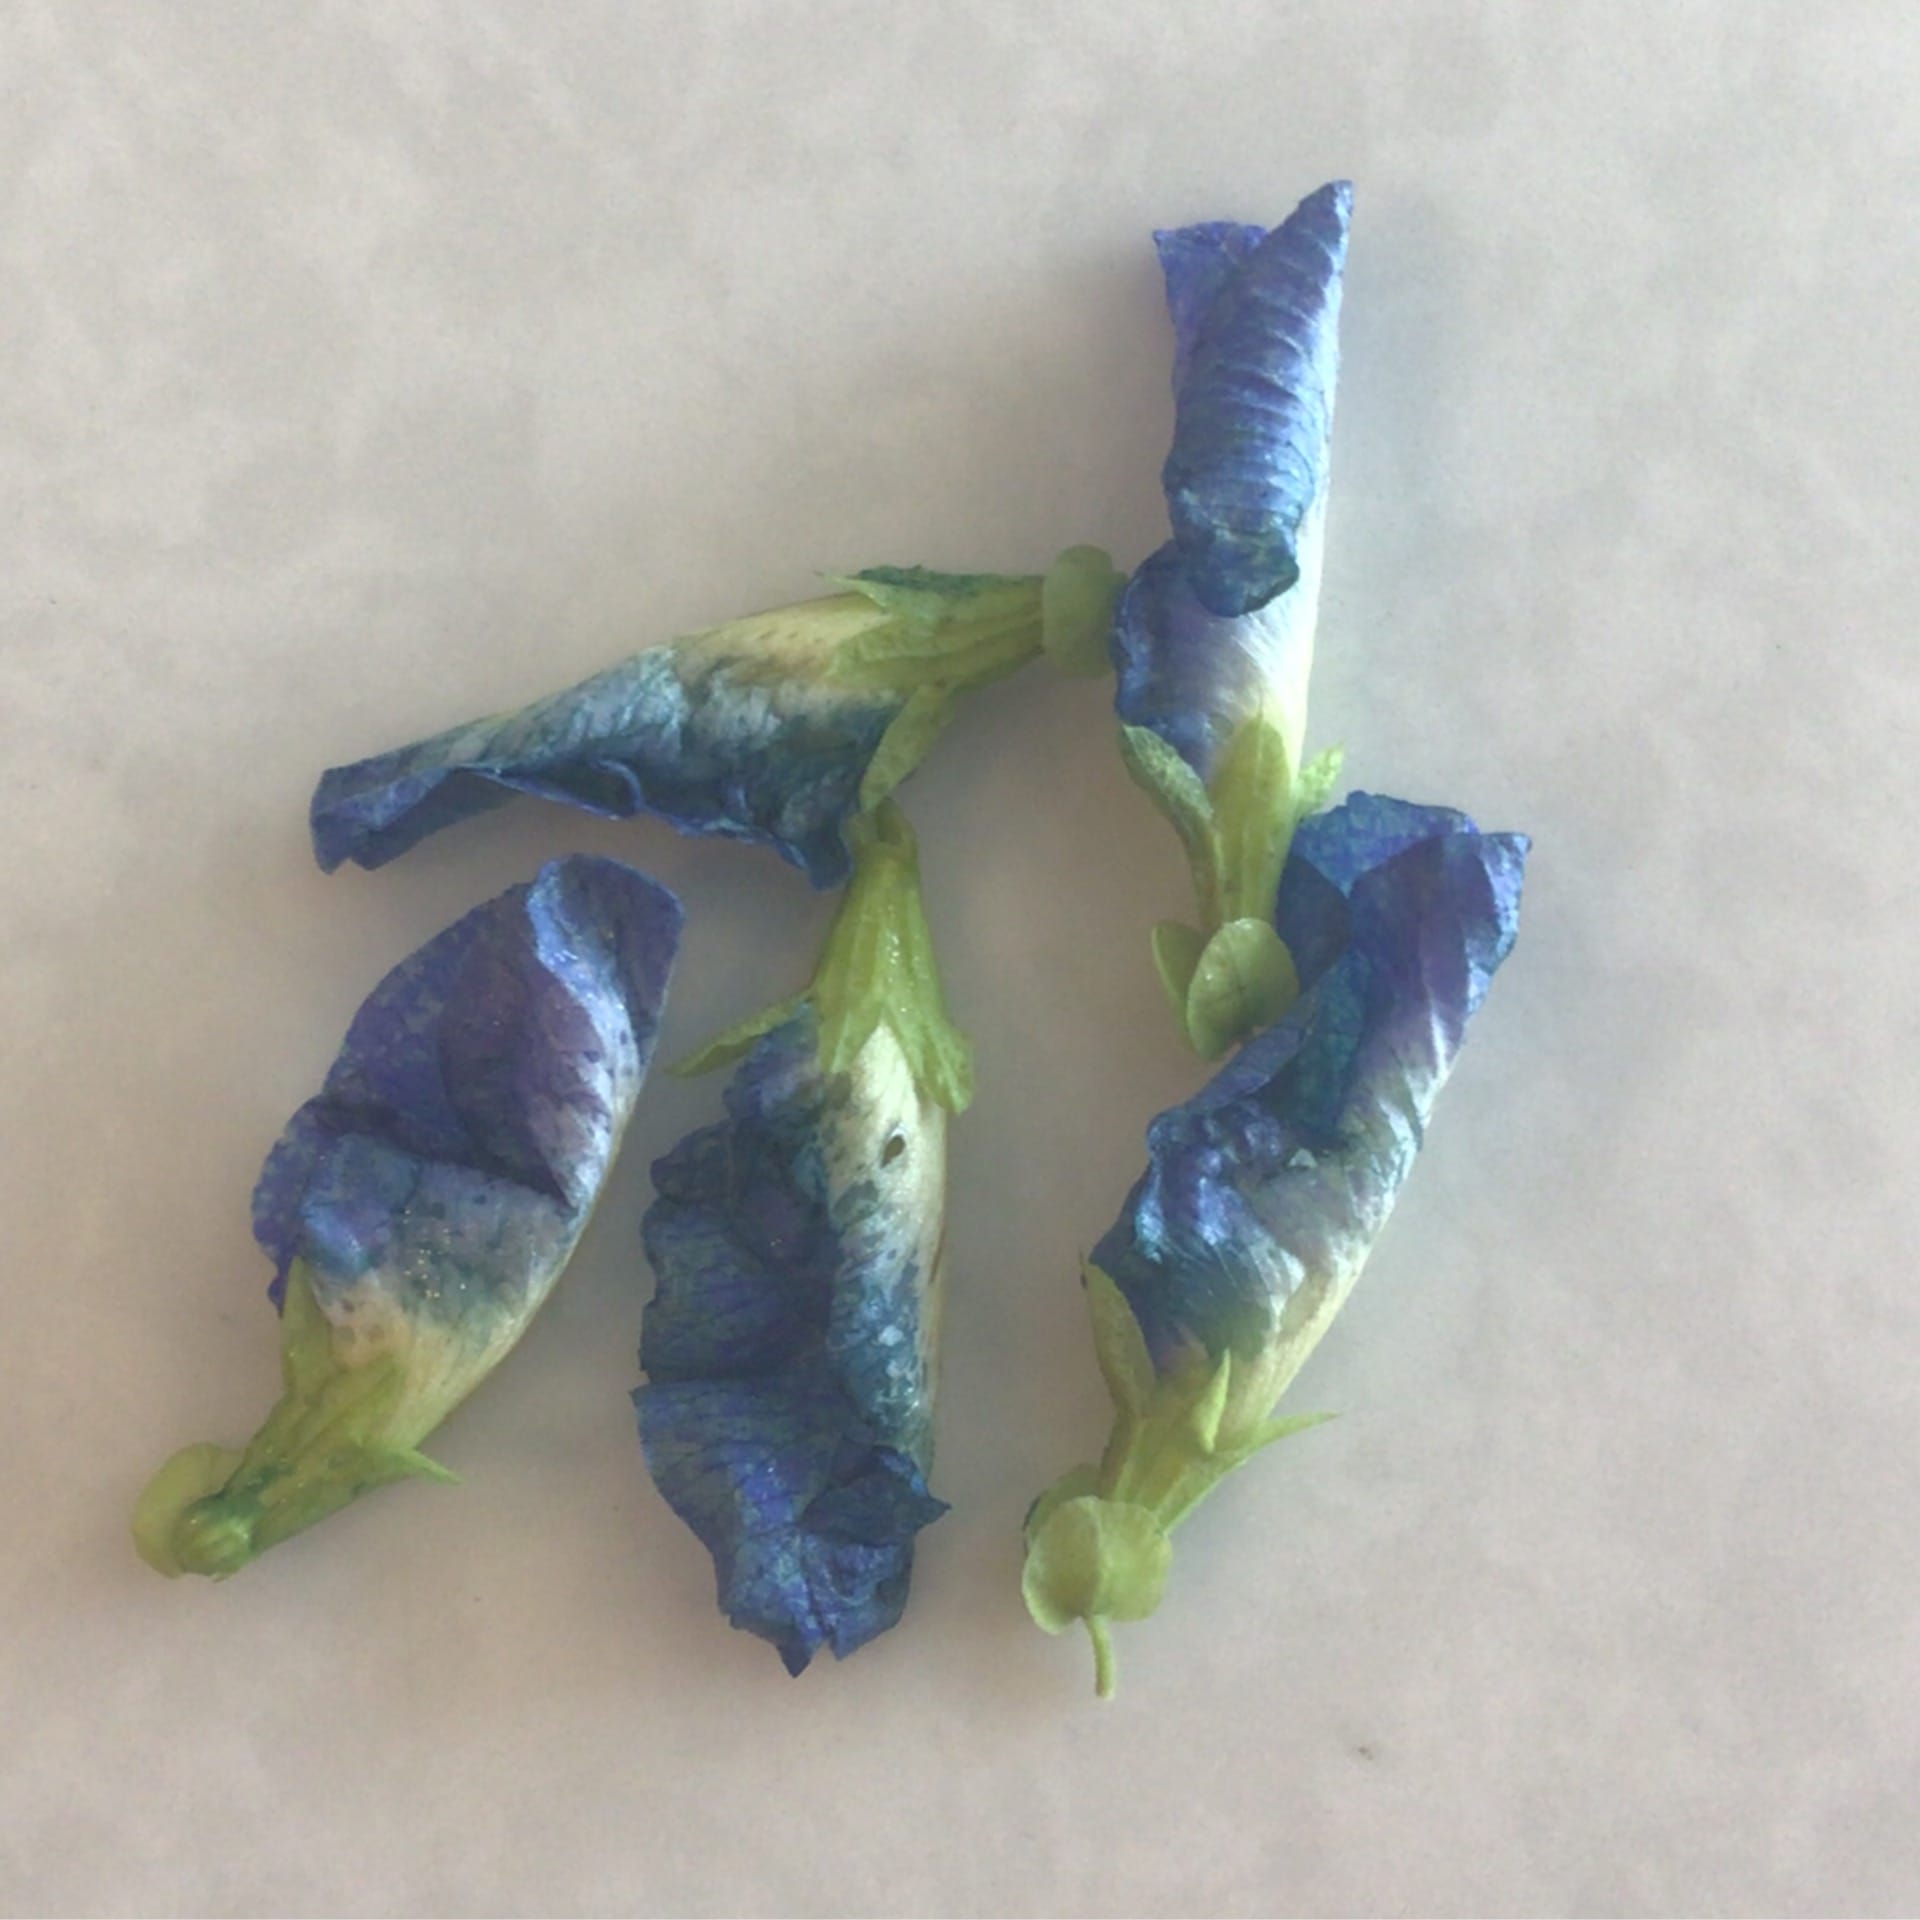 sold out edible flowers butterfly pea